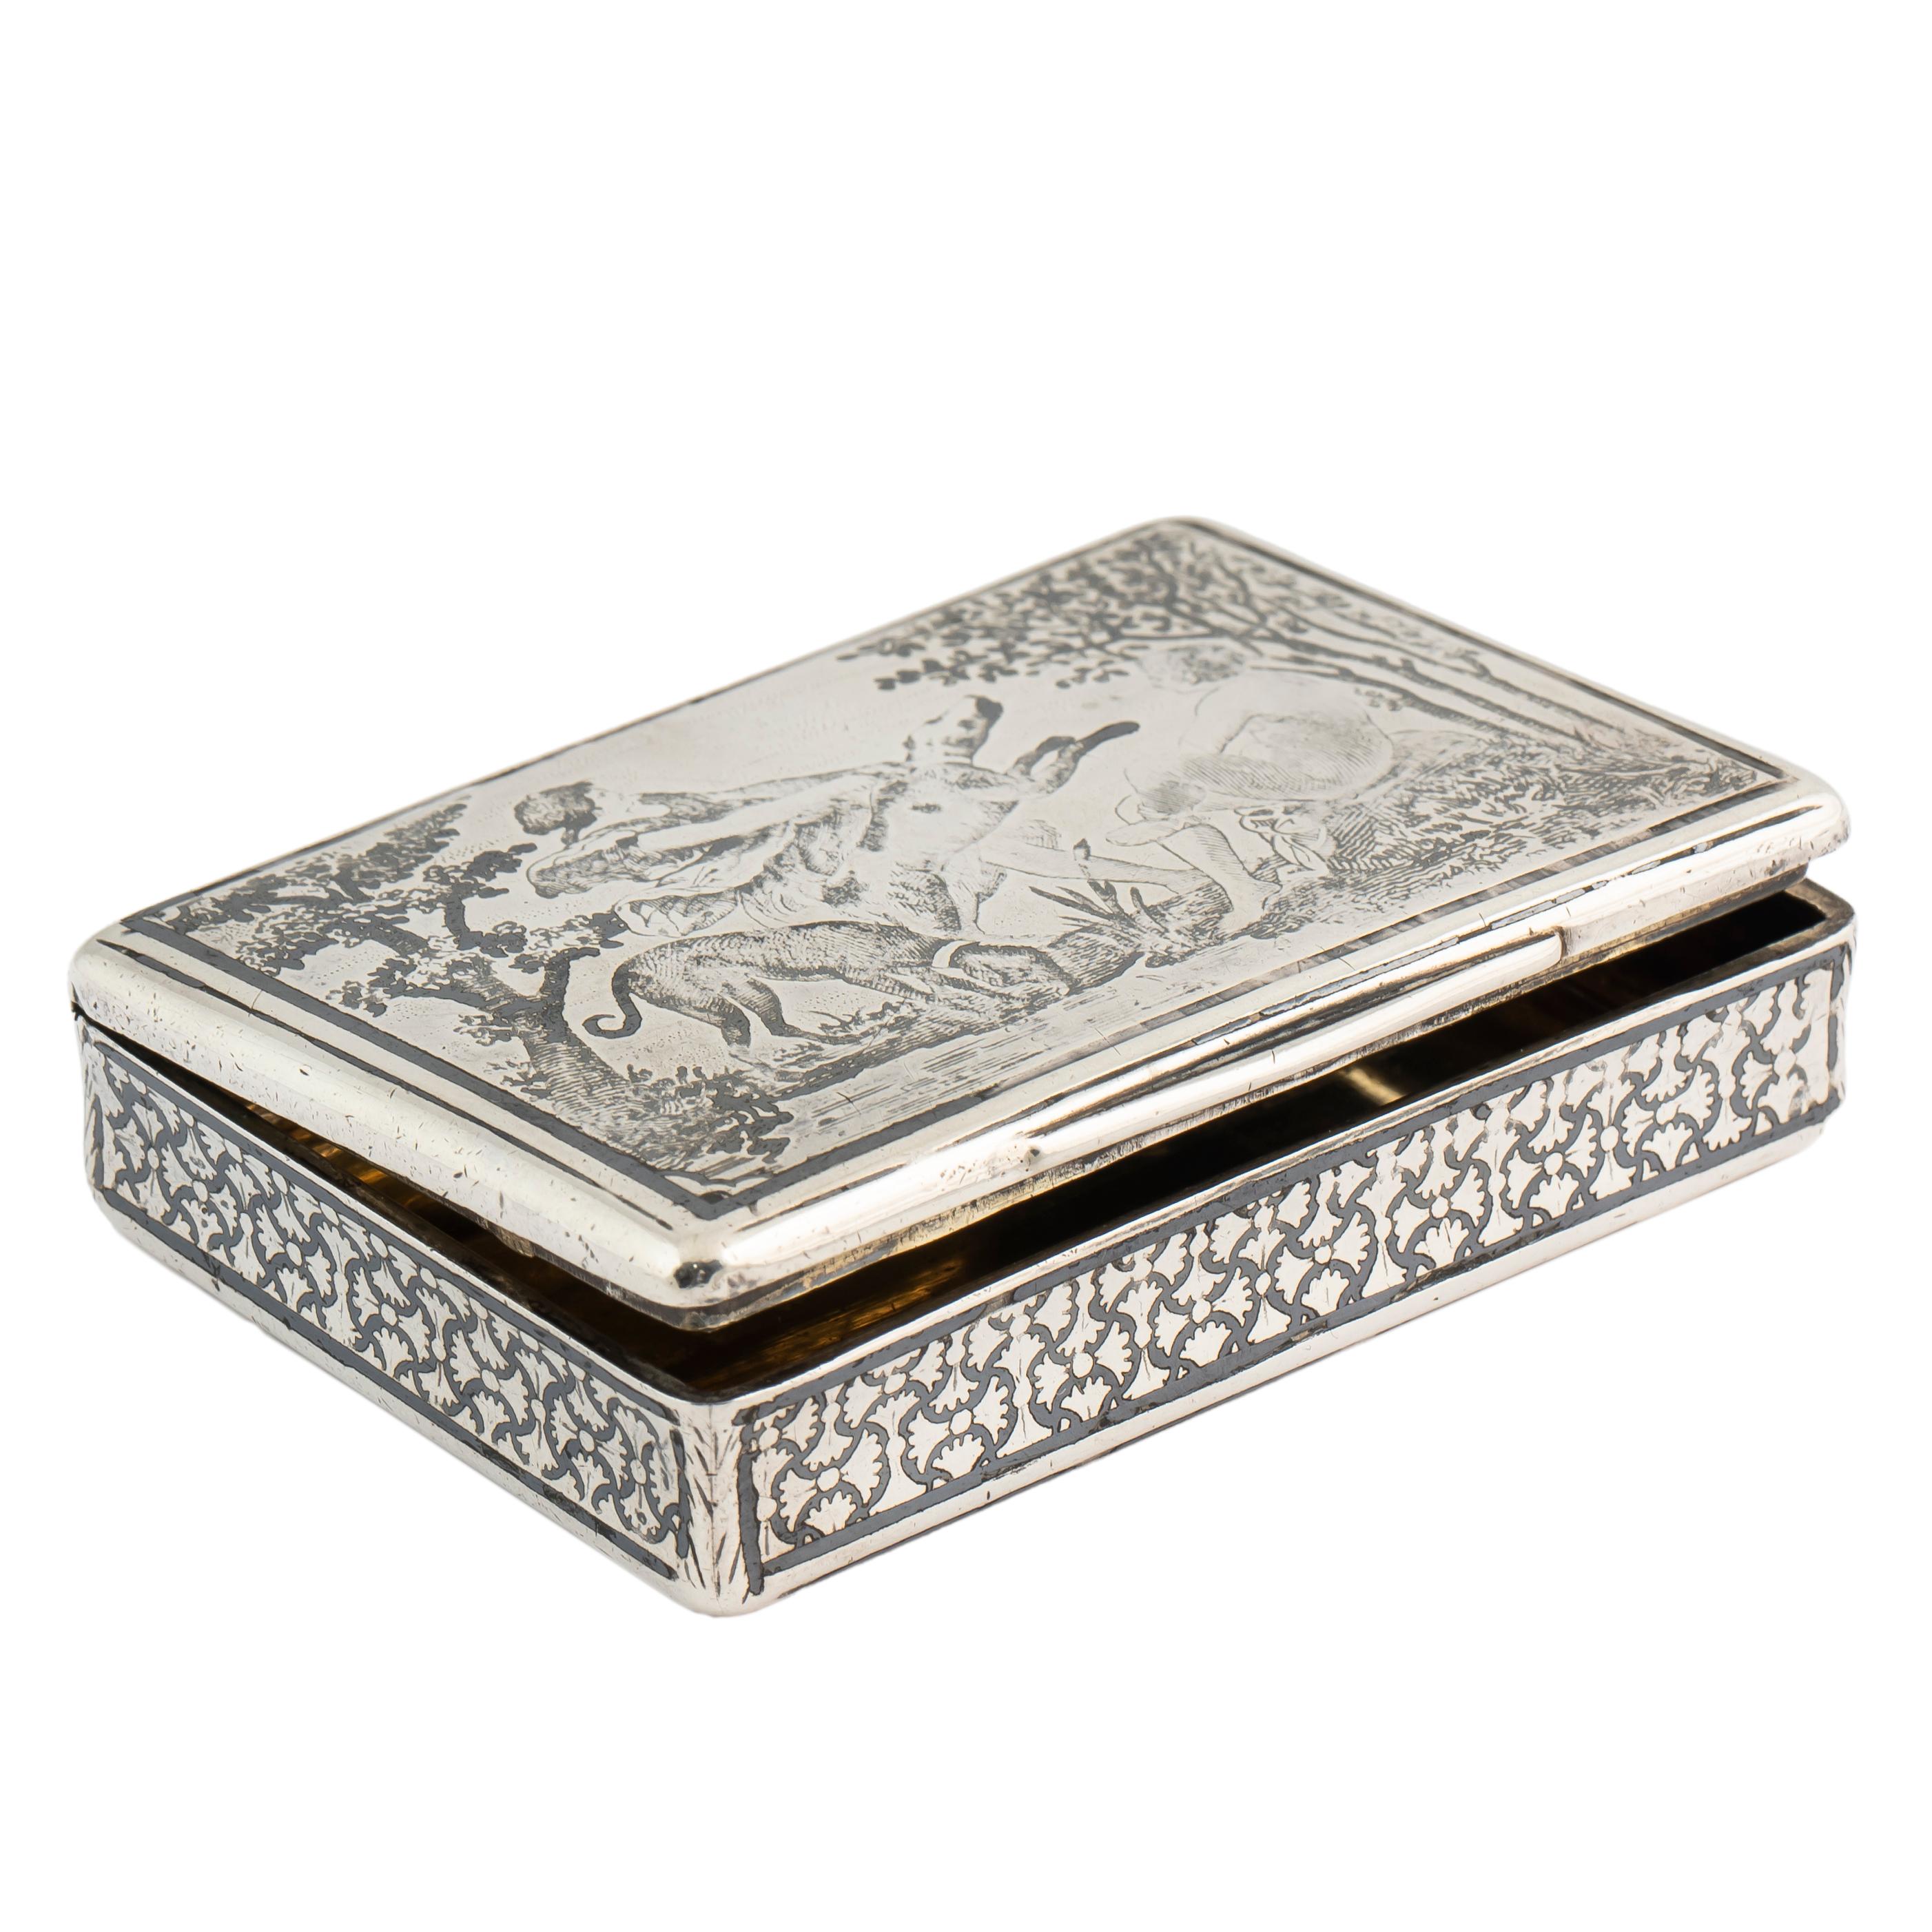 A rare French silver nielloed snuff box featuring a mythological hunting scene on the cover within a finely detailed wooded landscape, a hound barking up a tree is being restrained by a young warrior while a seated nude observes on the right. The